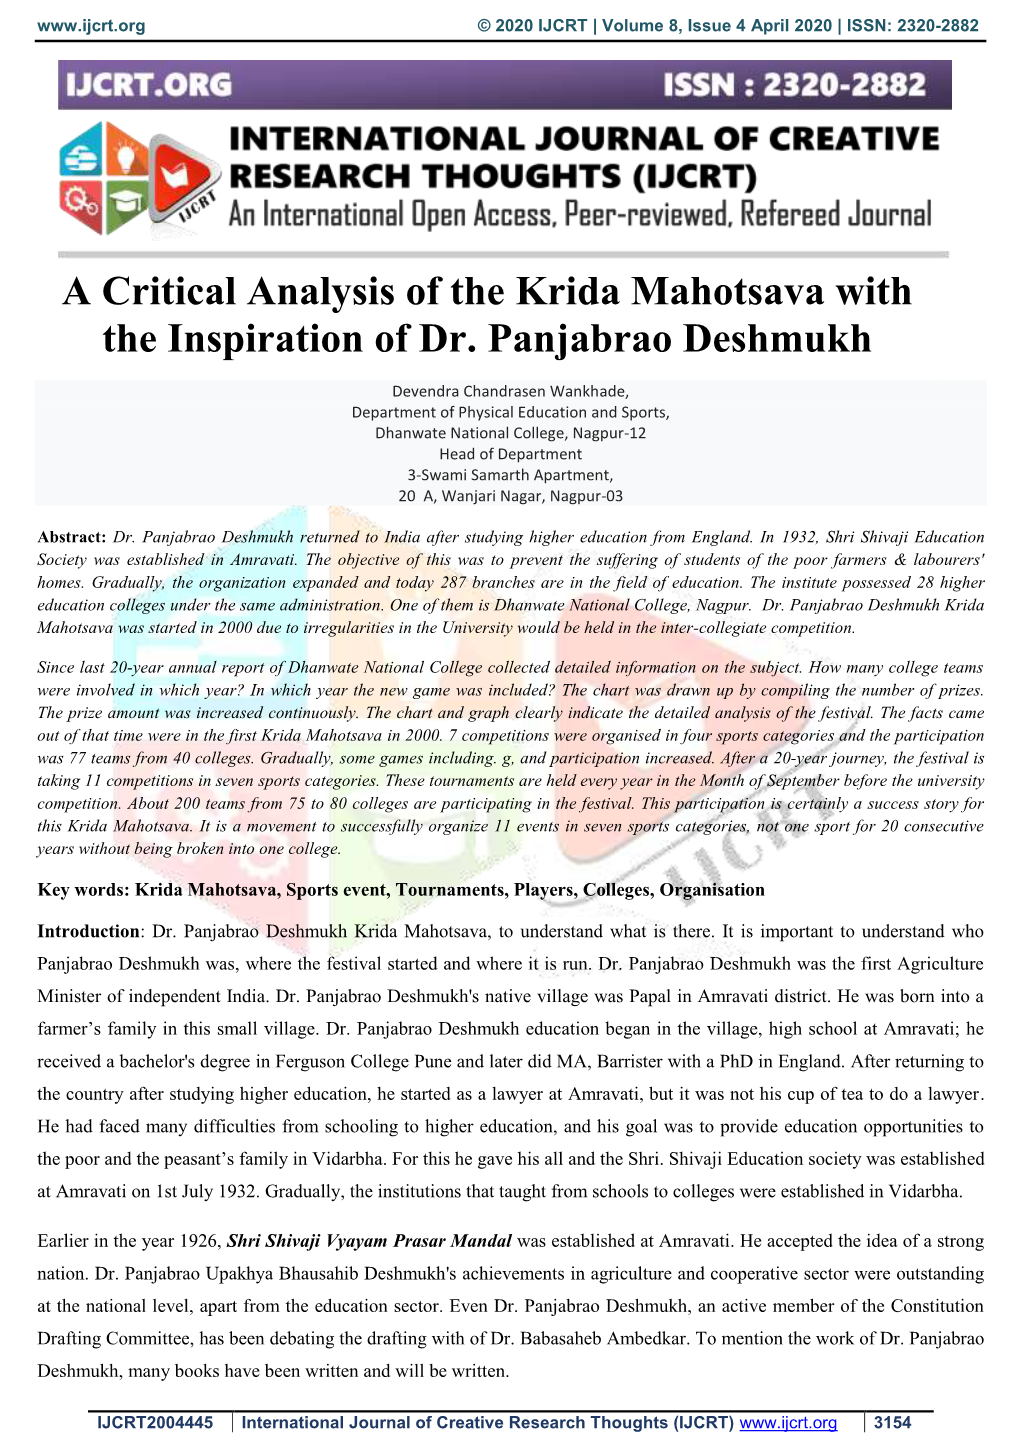 A Critical Analysis of the Krida Mahotsava with the Inspiration of Dr